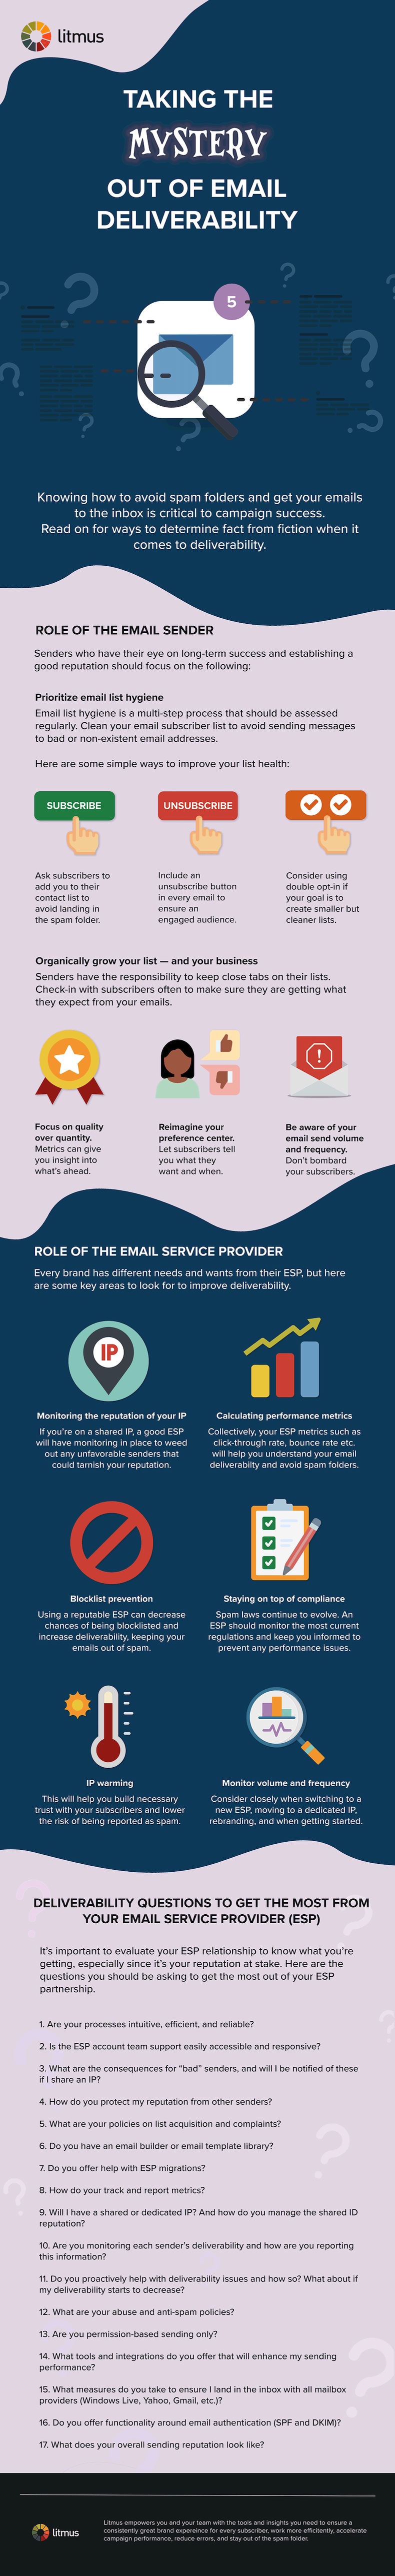 Taking the mystery out of email deliverability infographic